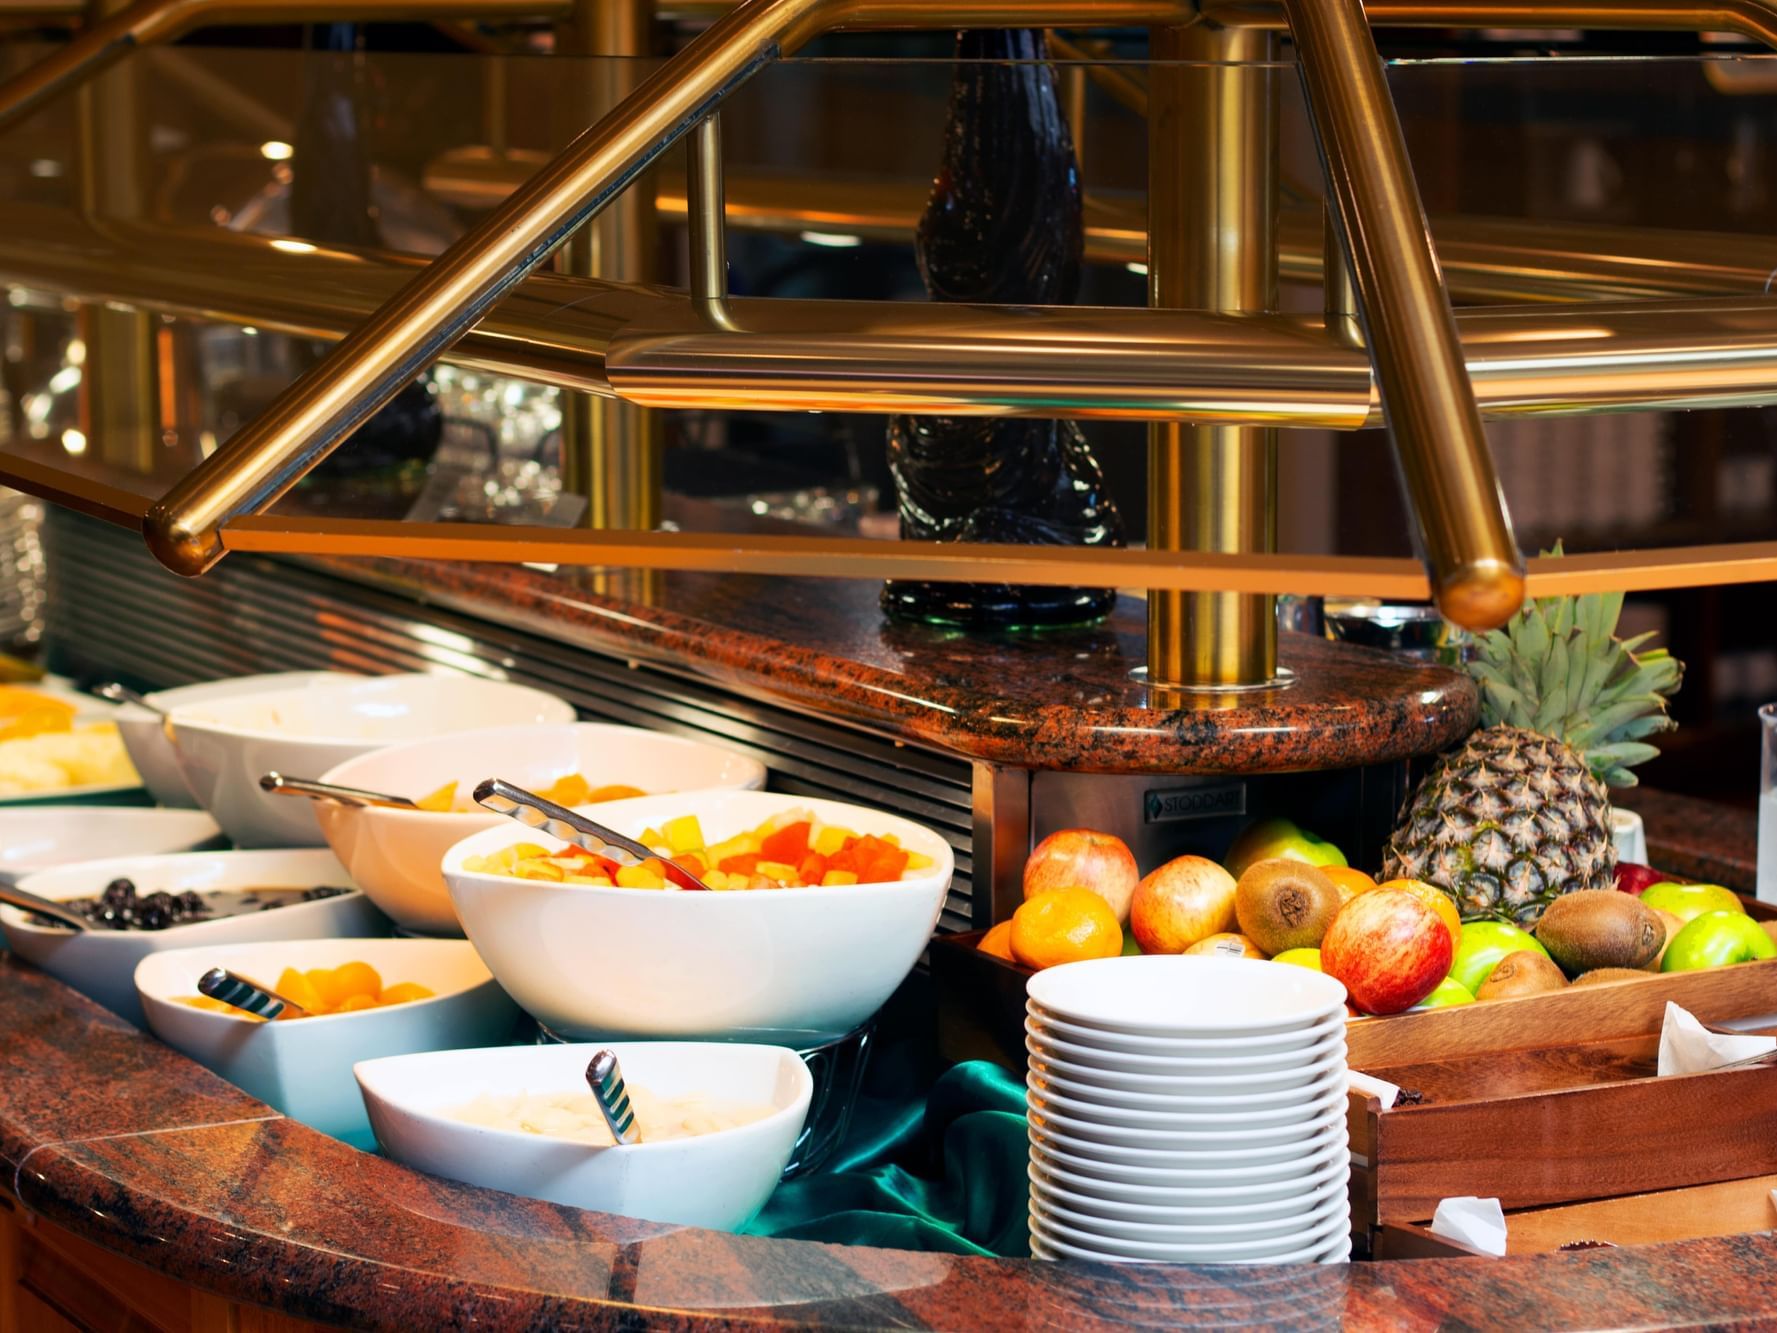 Fruits arranged in the buffet at Hotel Grand Chancellor Launceston